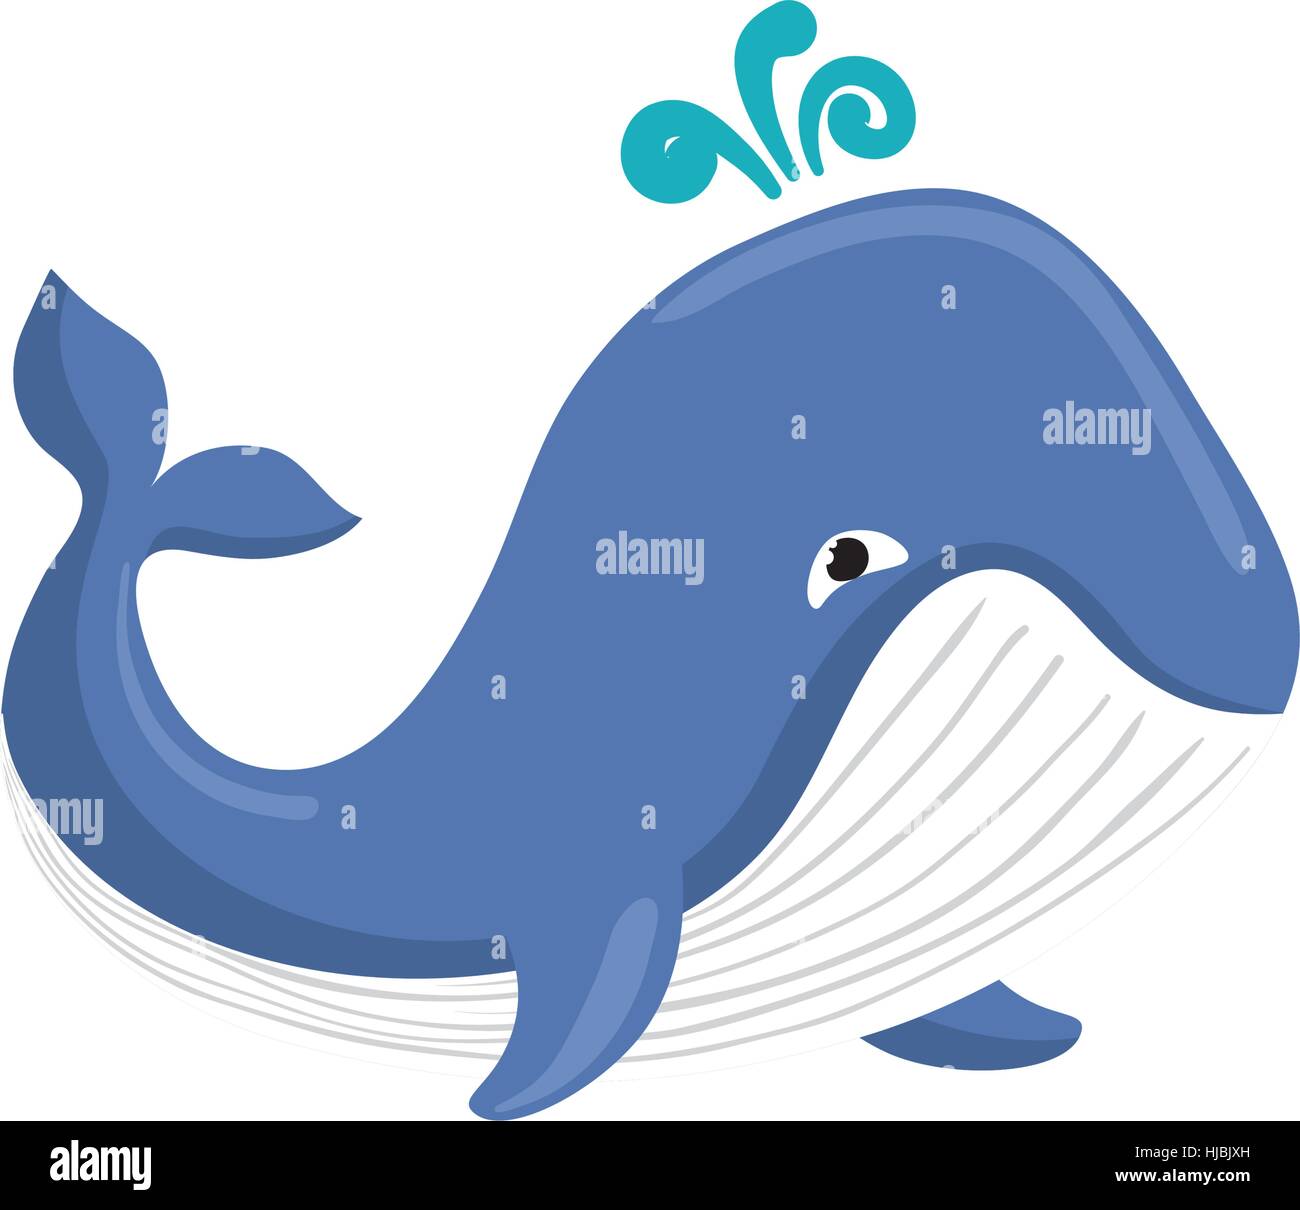 Drawing Blue Whale Stock Photos & Drawing Blue Whale Stock Images - Alamy